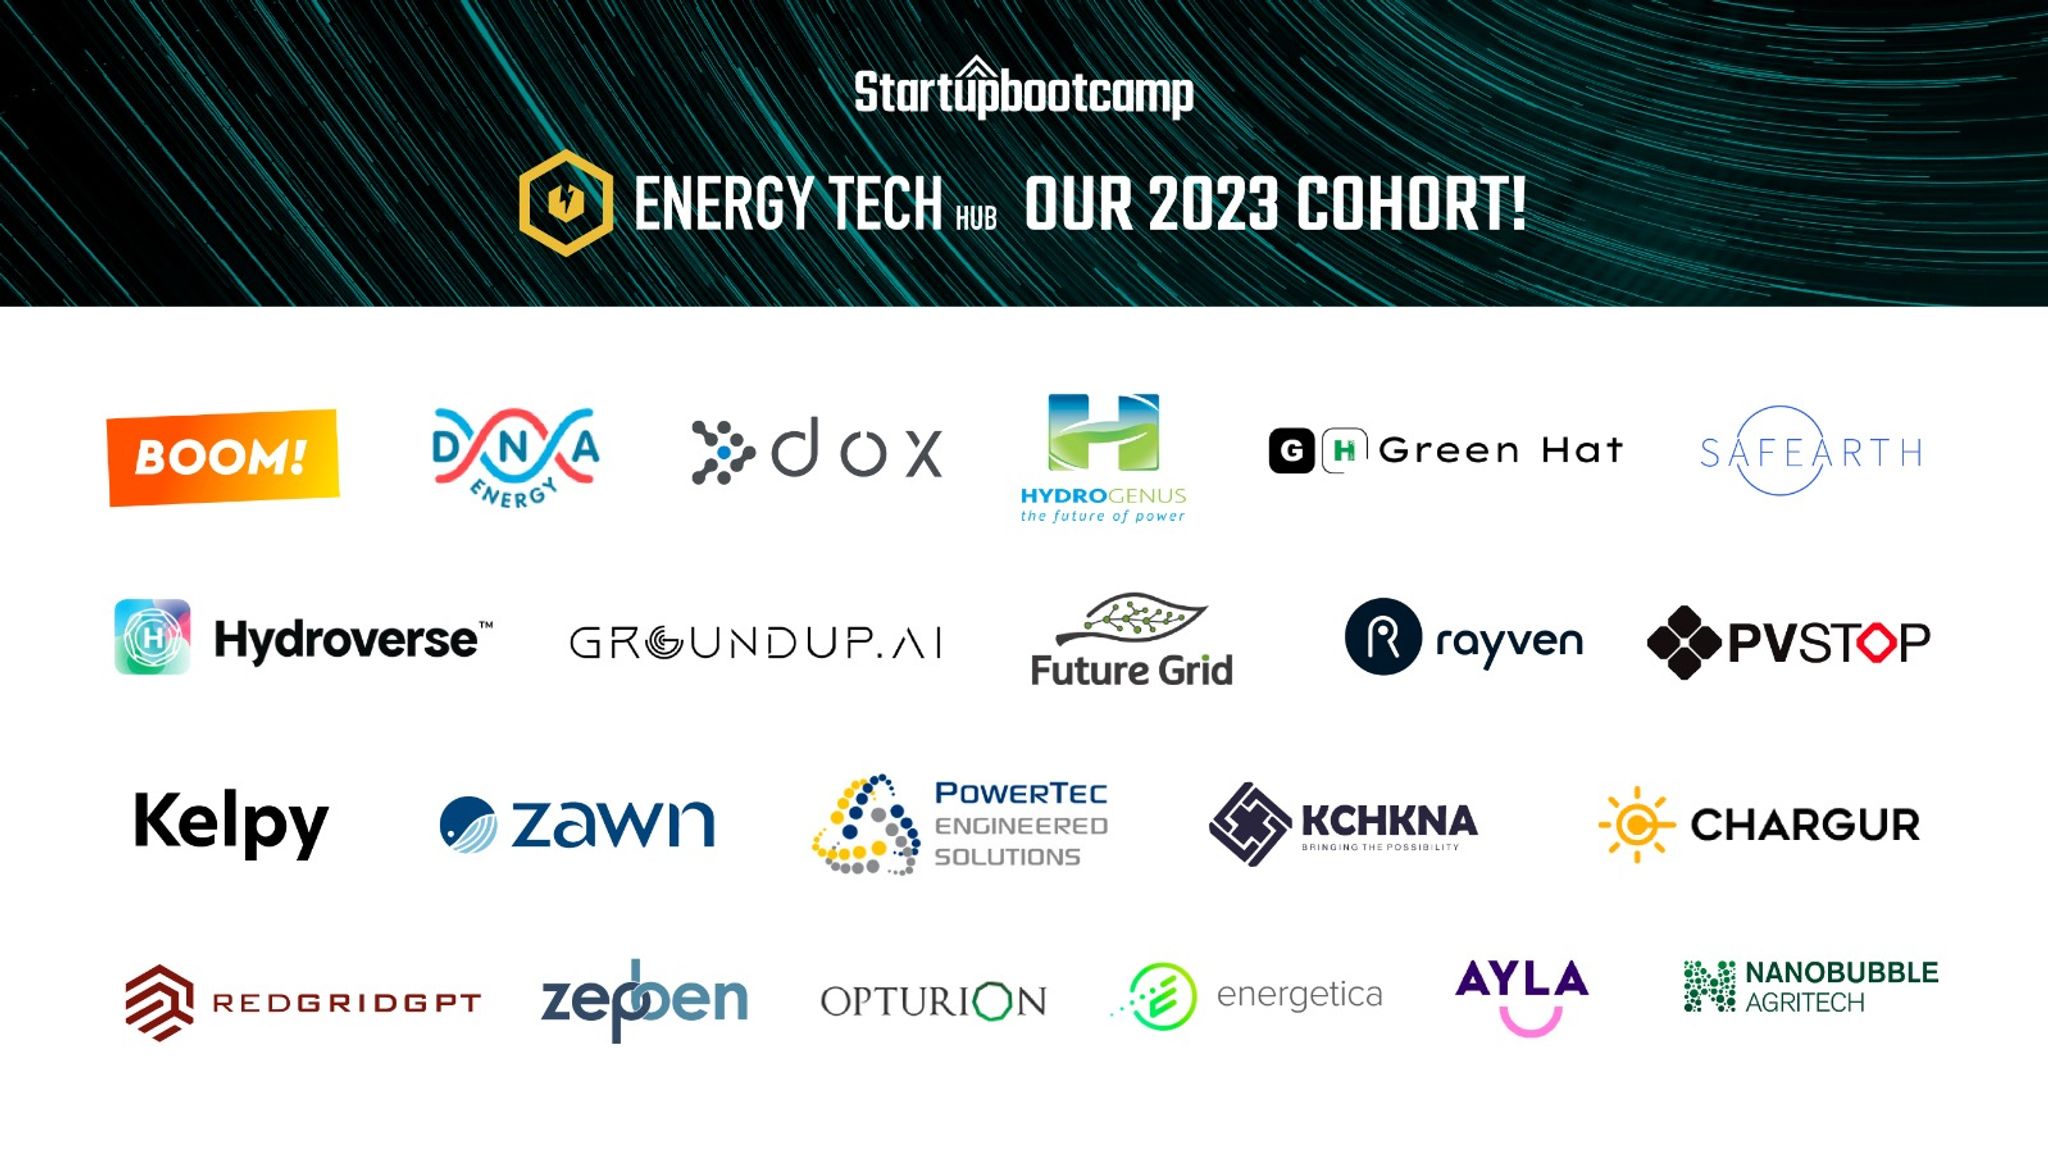 Learn who is in our EnergyTech Hub 2023 Cohort!